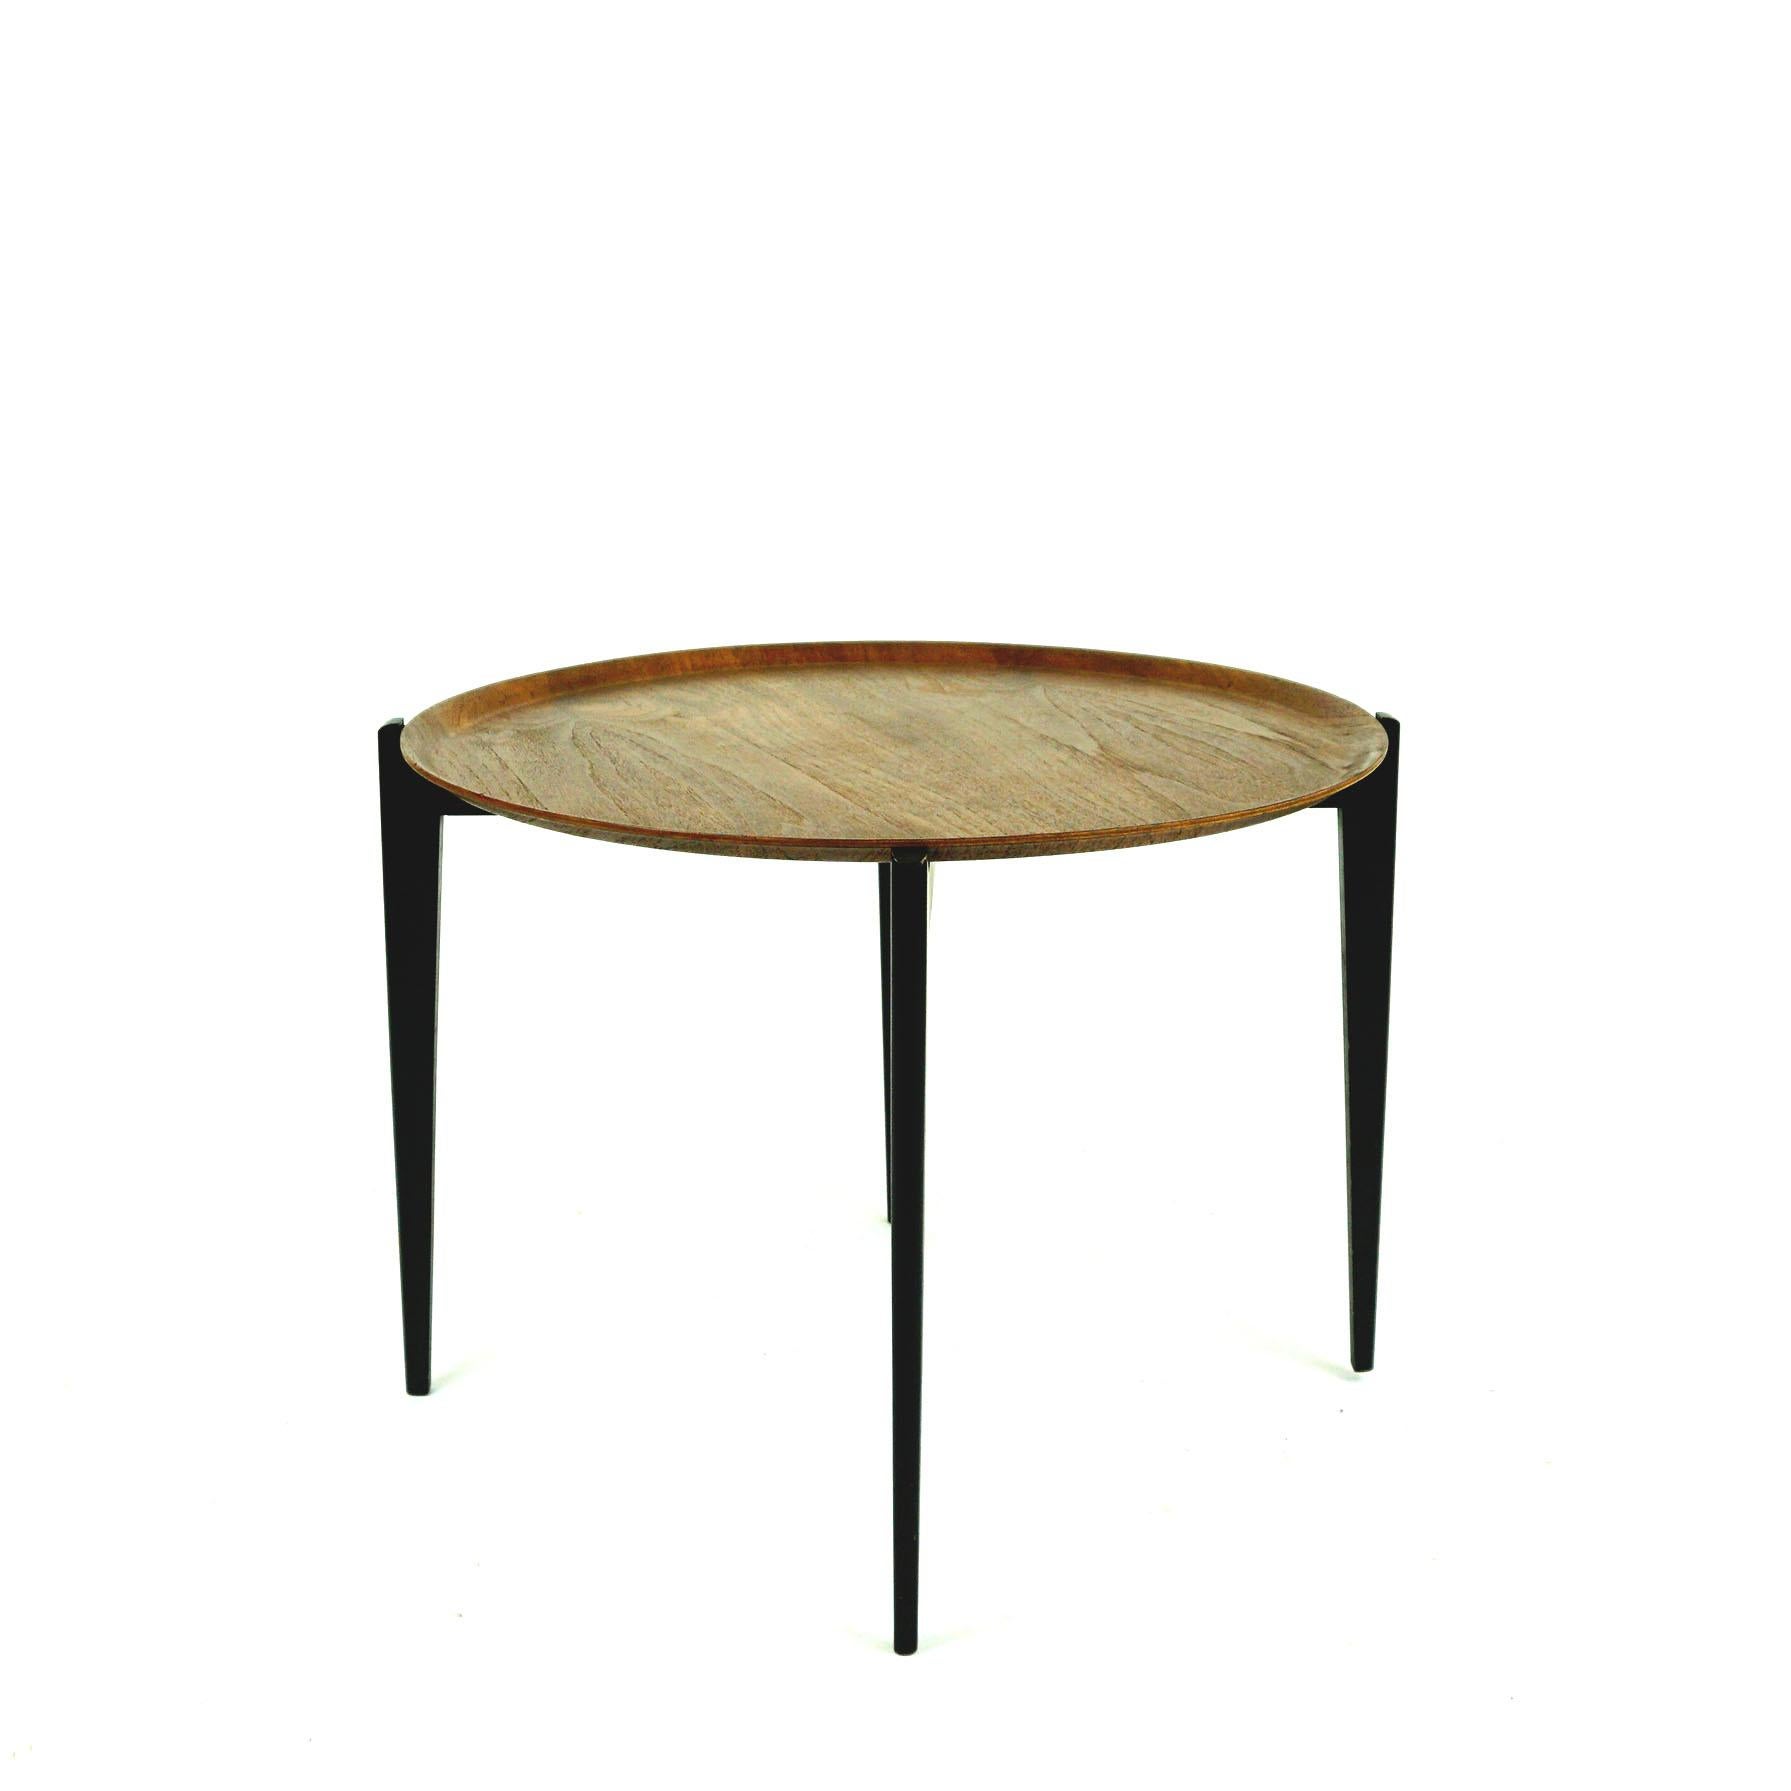 Iconic Scandinavian circular foldable teak side table with removable tray top in the style of Svend Åge Willumsen & Hans Engholm for Fritz Hansen. 
This table was manufactured in the 1950s and is marked two times Made in Sweden, at the foldable